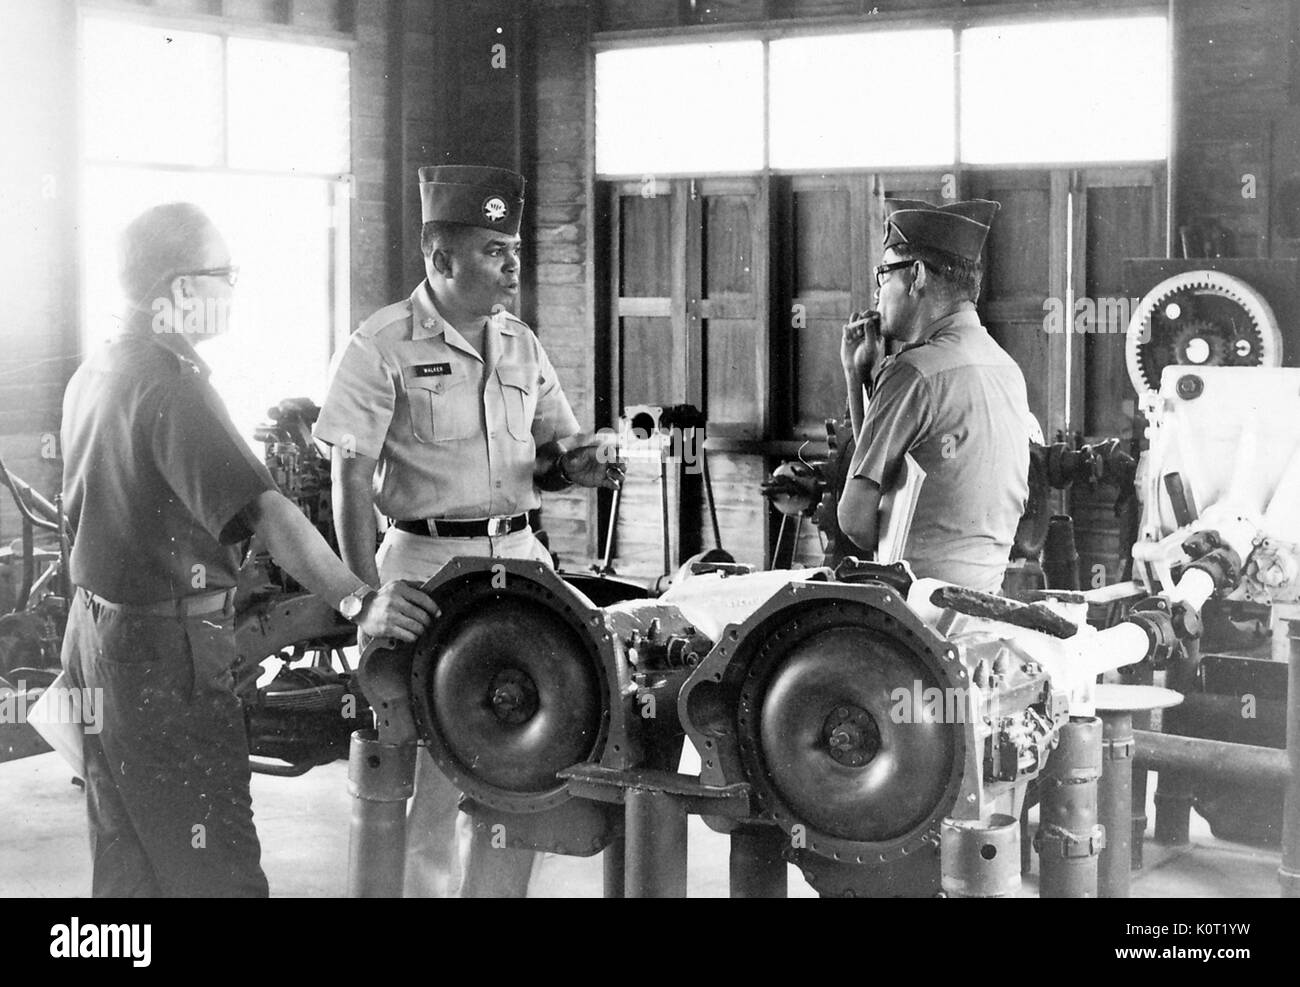 African-american lieutenant standing with two other American servicemen during the Vietnam War, in a heavy vehicle machine shop, one man smoking a cigarette, the other man resting his hand on a part for a truck, the lieutenant gesturing and in mid speech, 1969. Stock Photo